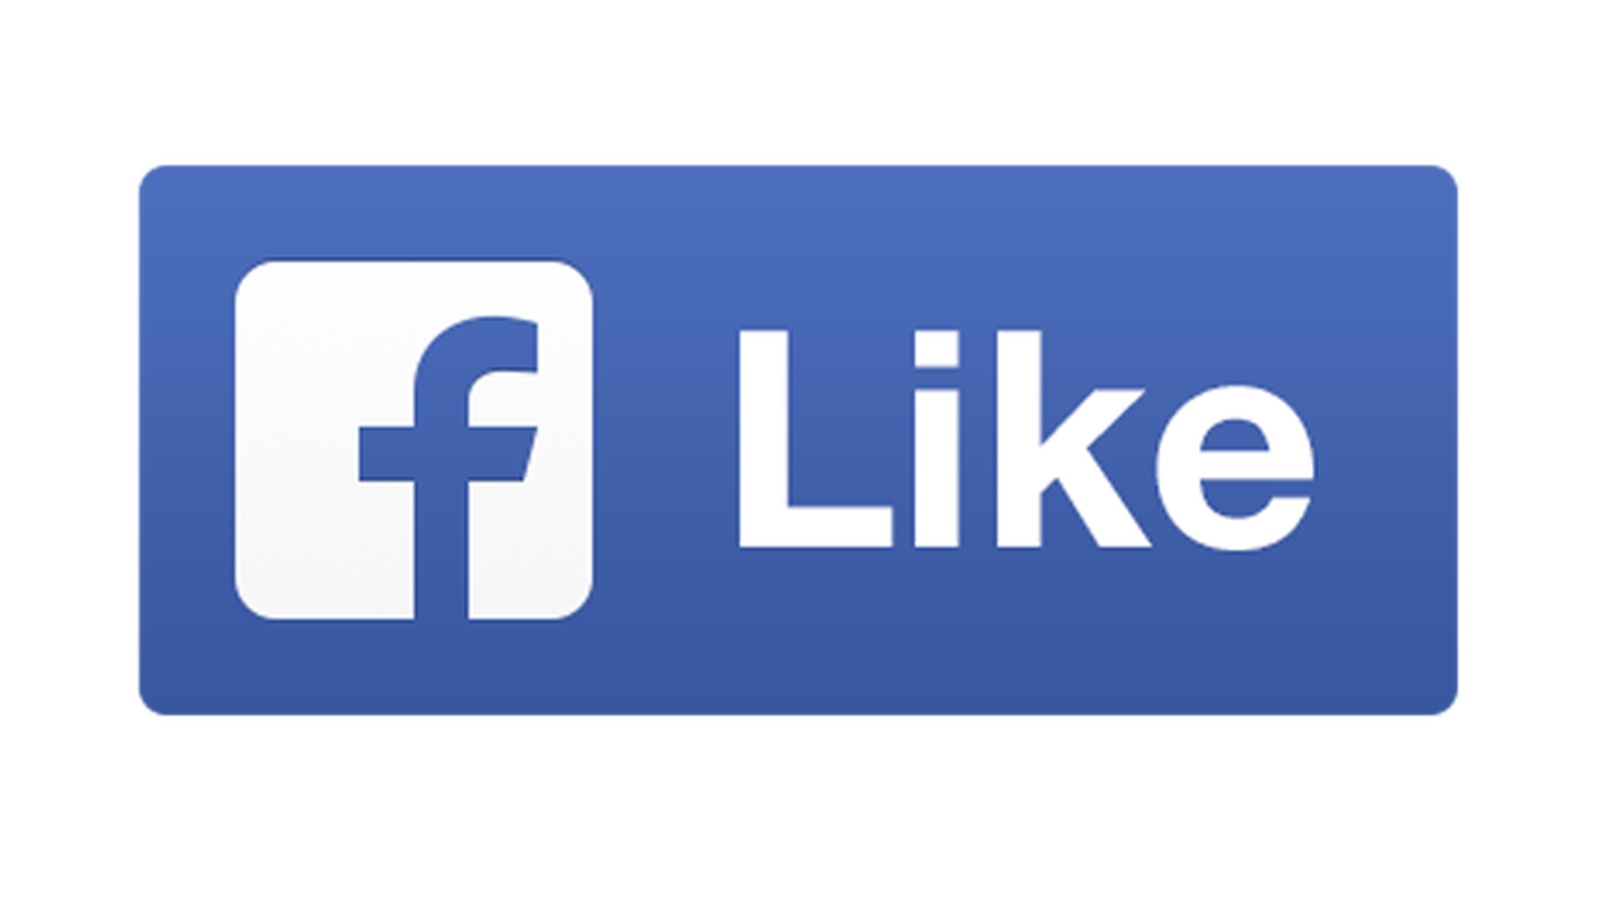 Facebook redesigns the Like button for the first time - The Verge